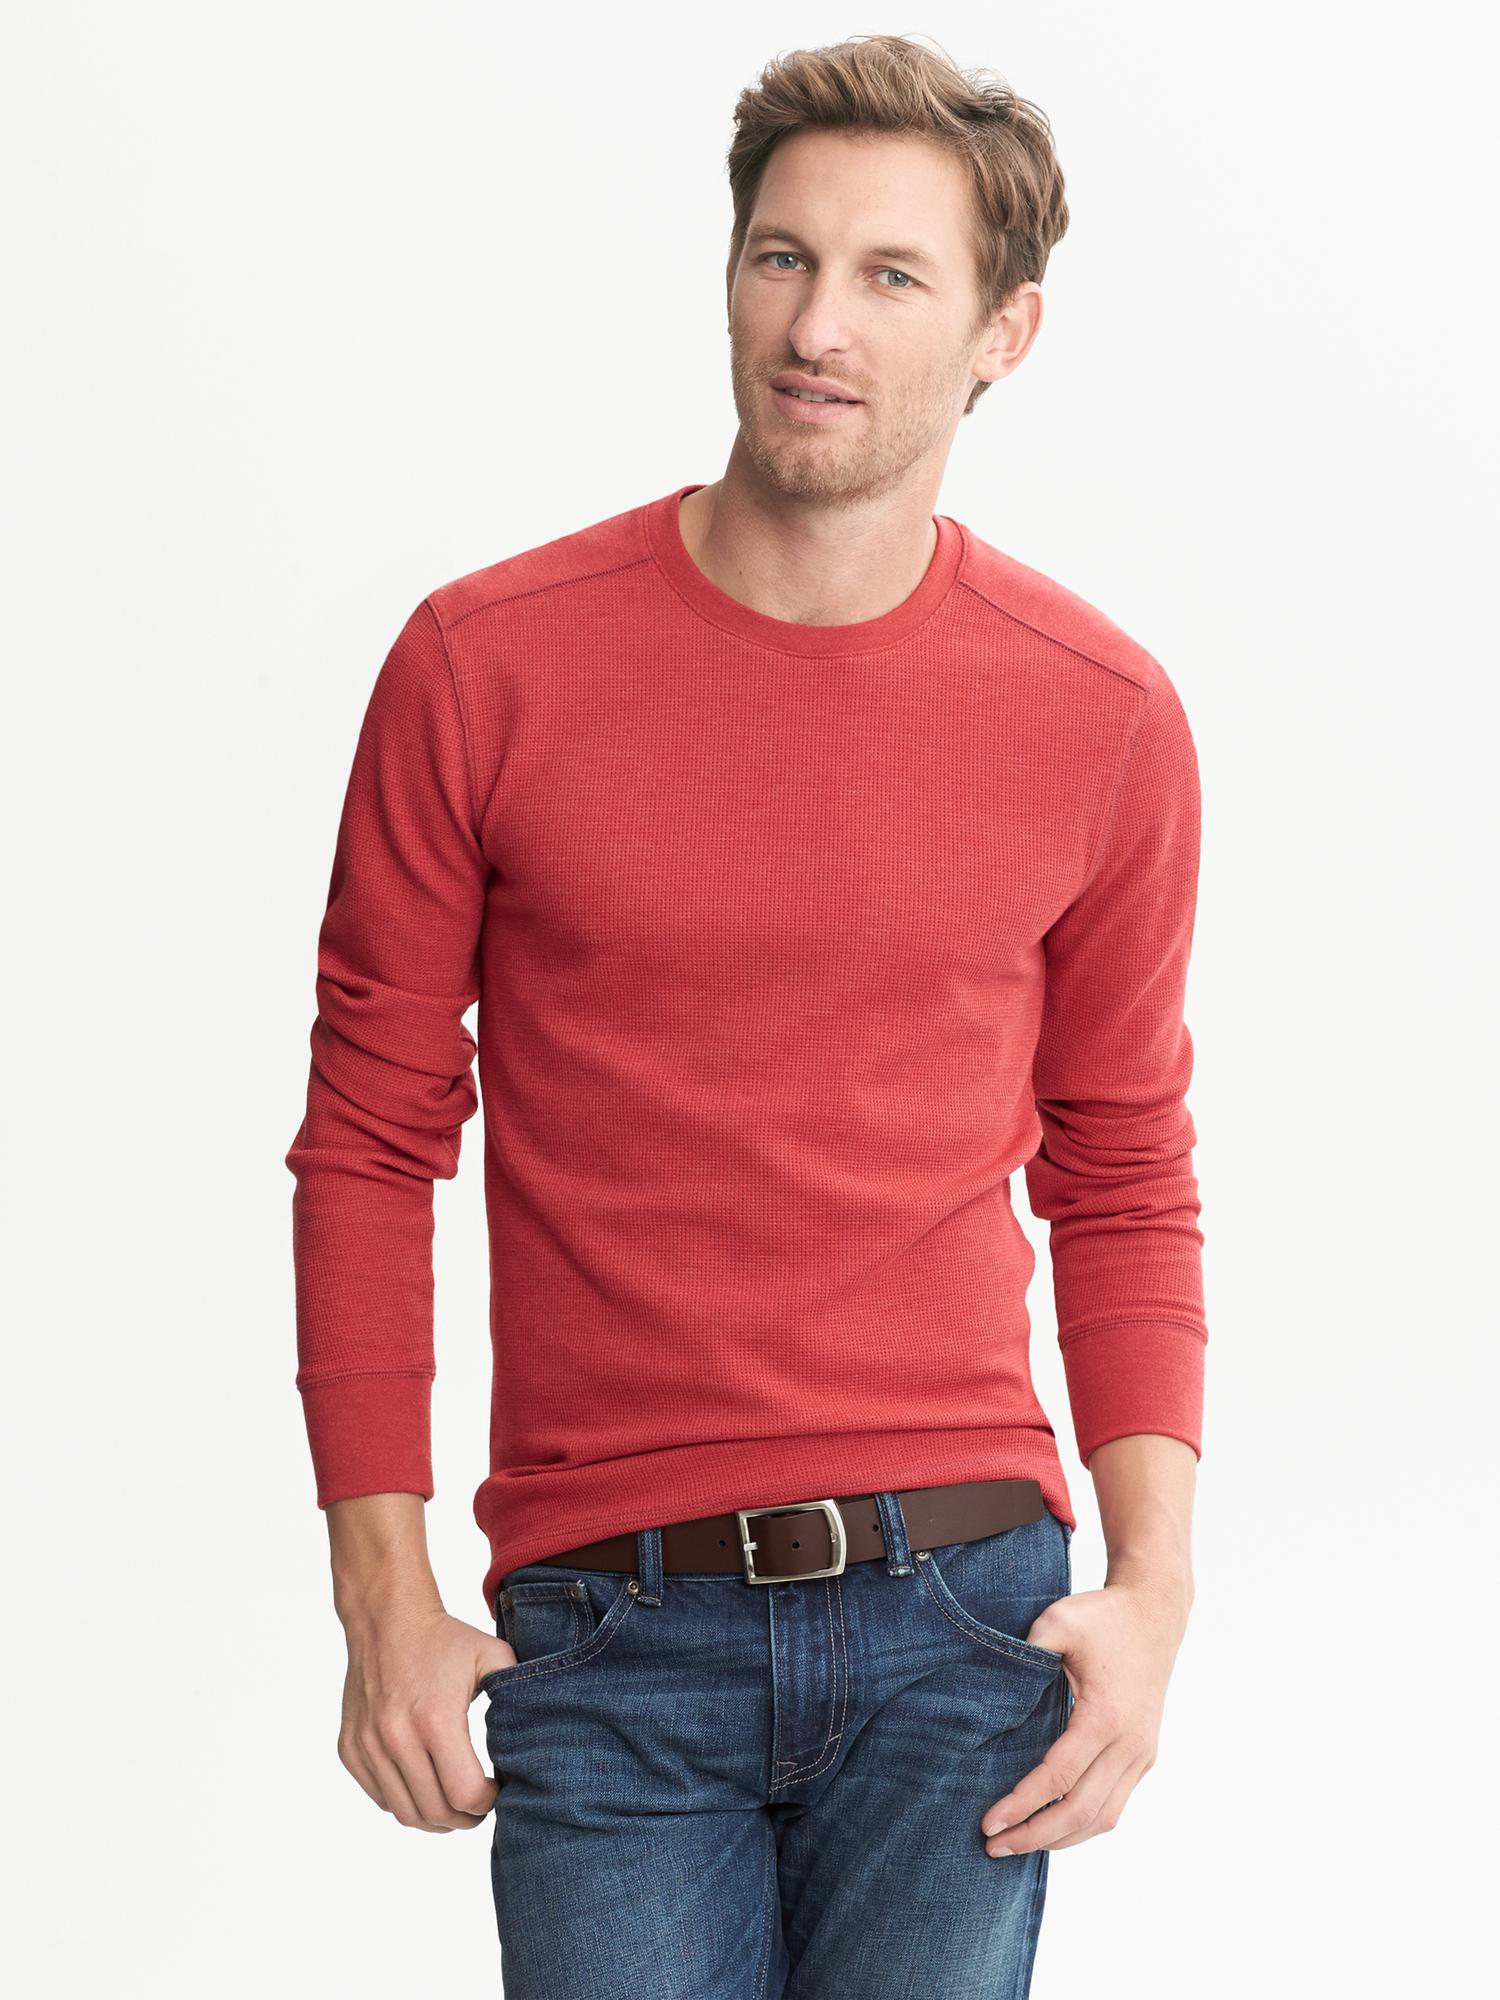 A Mens Knit Tee shirt Can Be the Versatile Wardrobe Essential – Telegraph